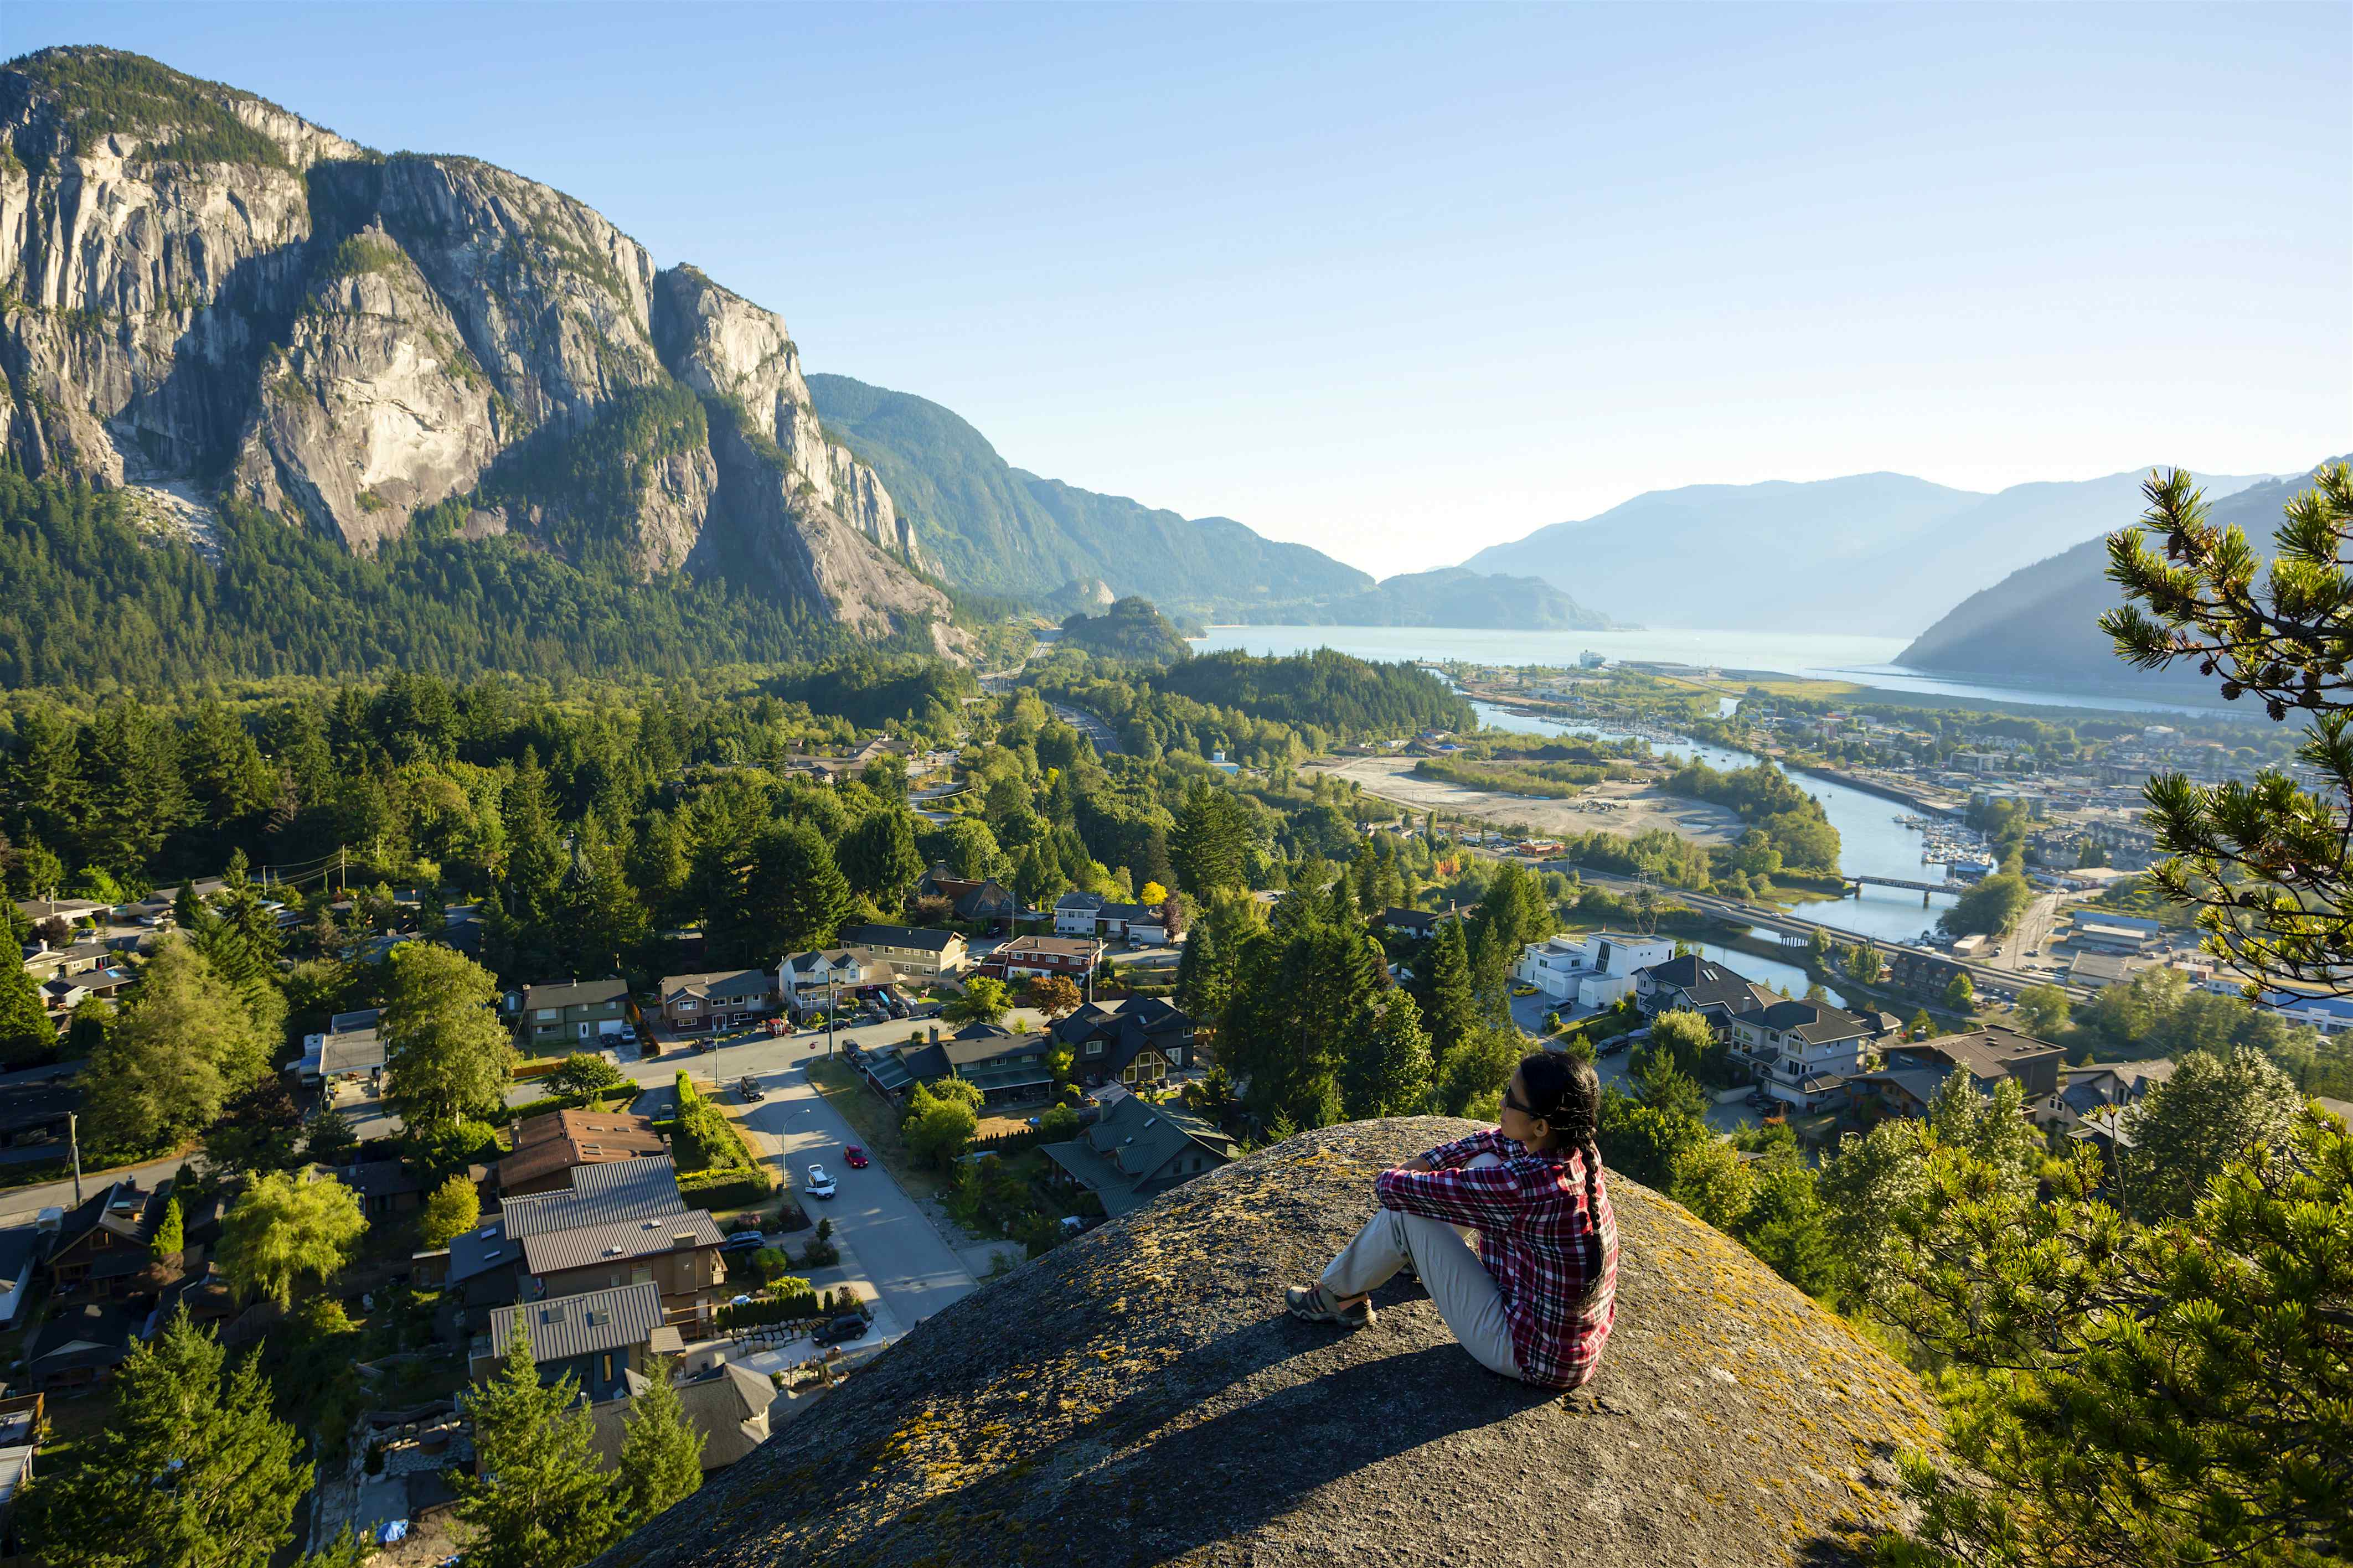 trips from vancouver